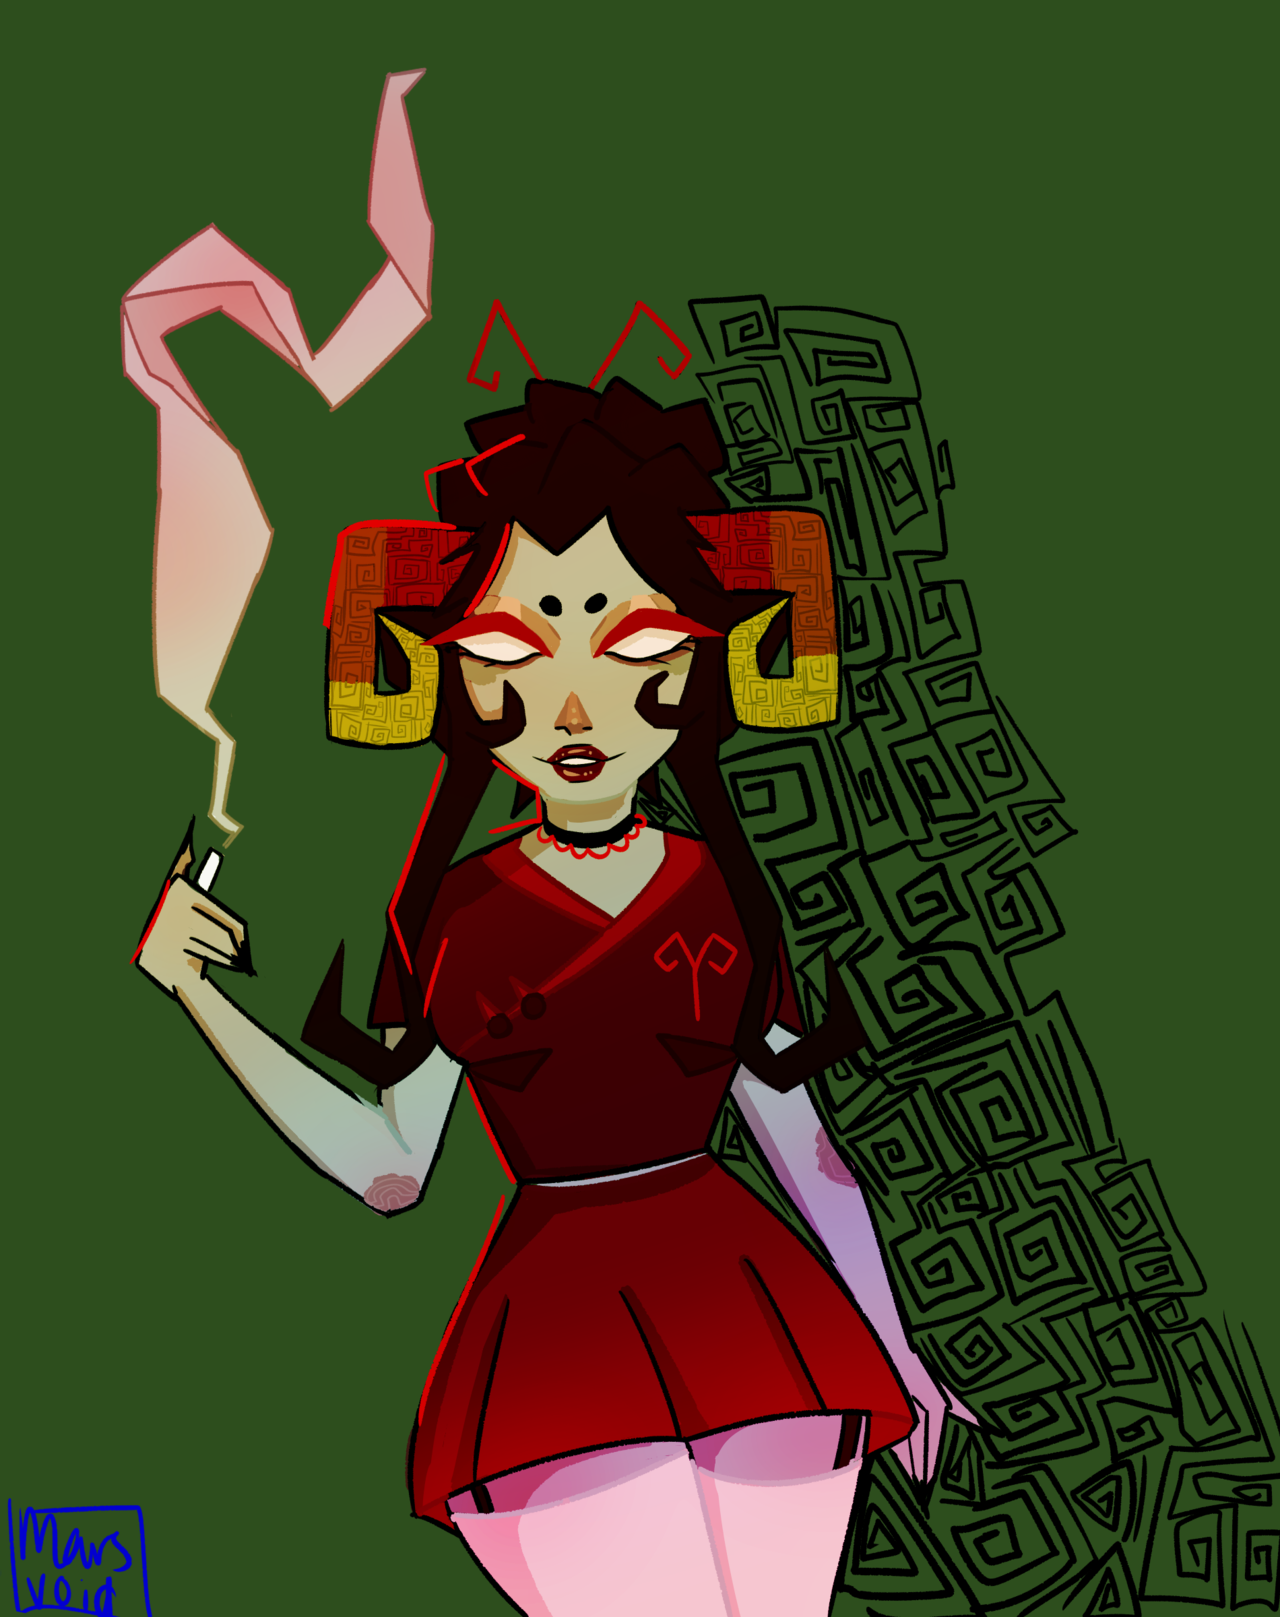 marsvoid:
“im wearin a red shirt today and it made me think ‘hm i should finish that damara drawing’, so i did.
”